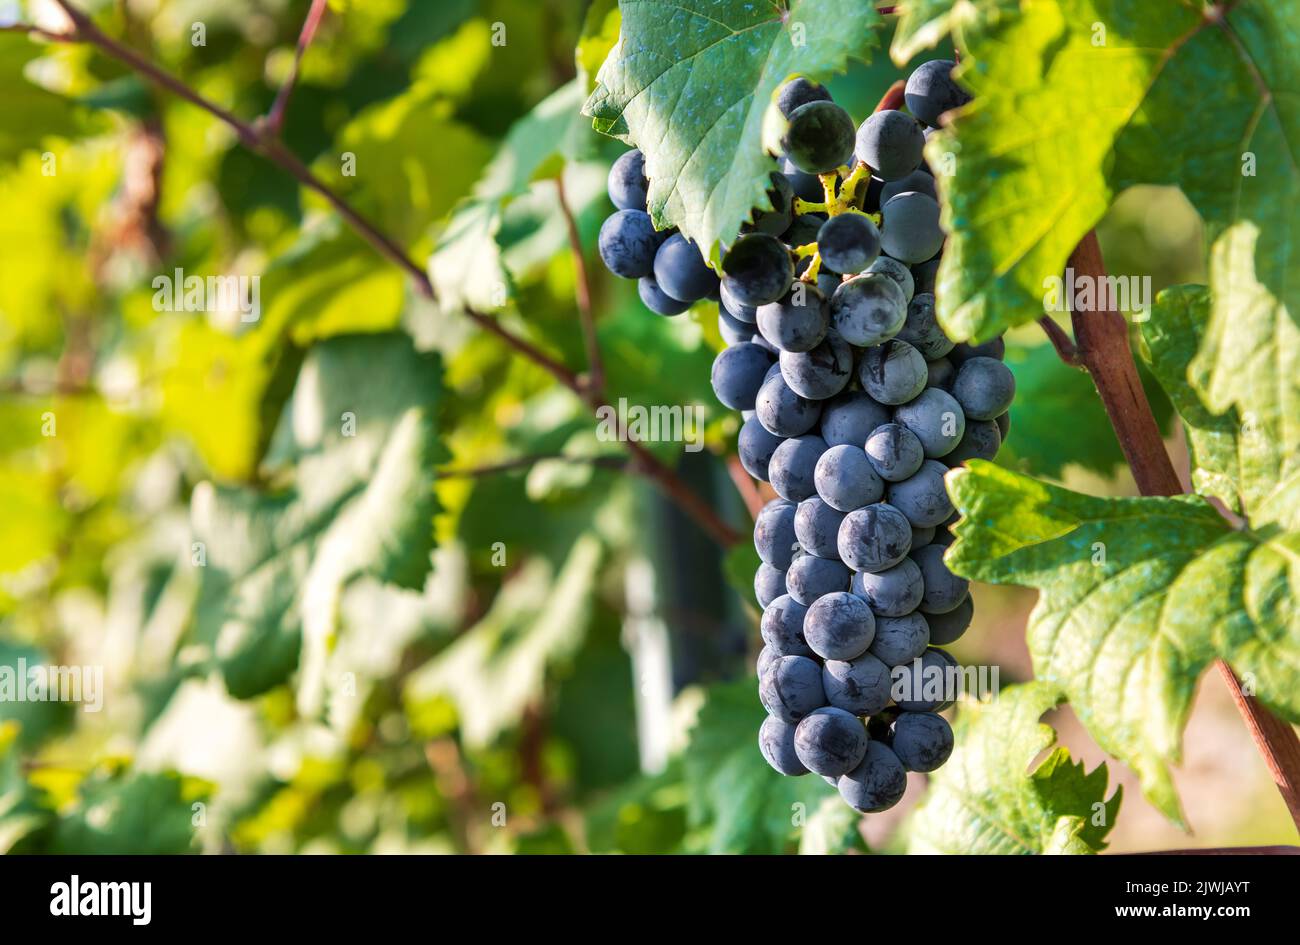 Soft focus of bunch of ripe black Barolo grapes hanging amidst green leaves on sunlit vine on sunny autumn day on farm Stock Photo